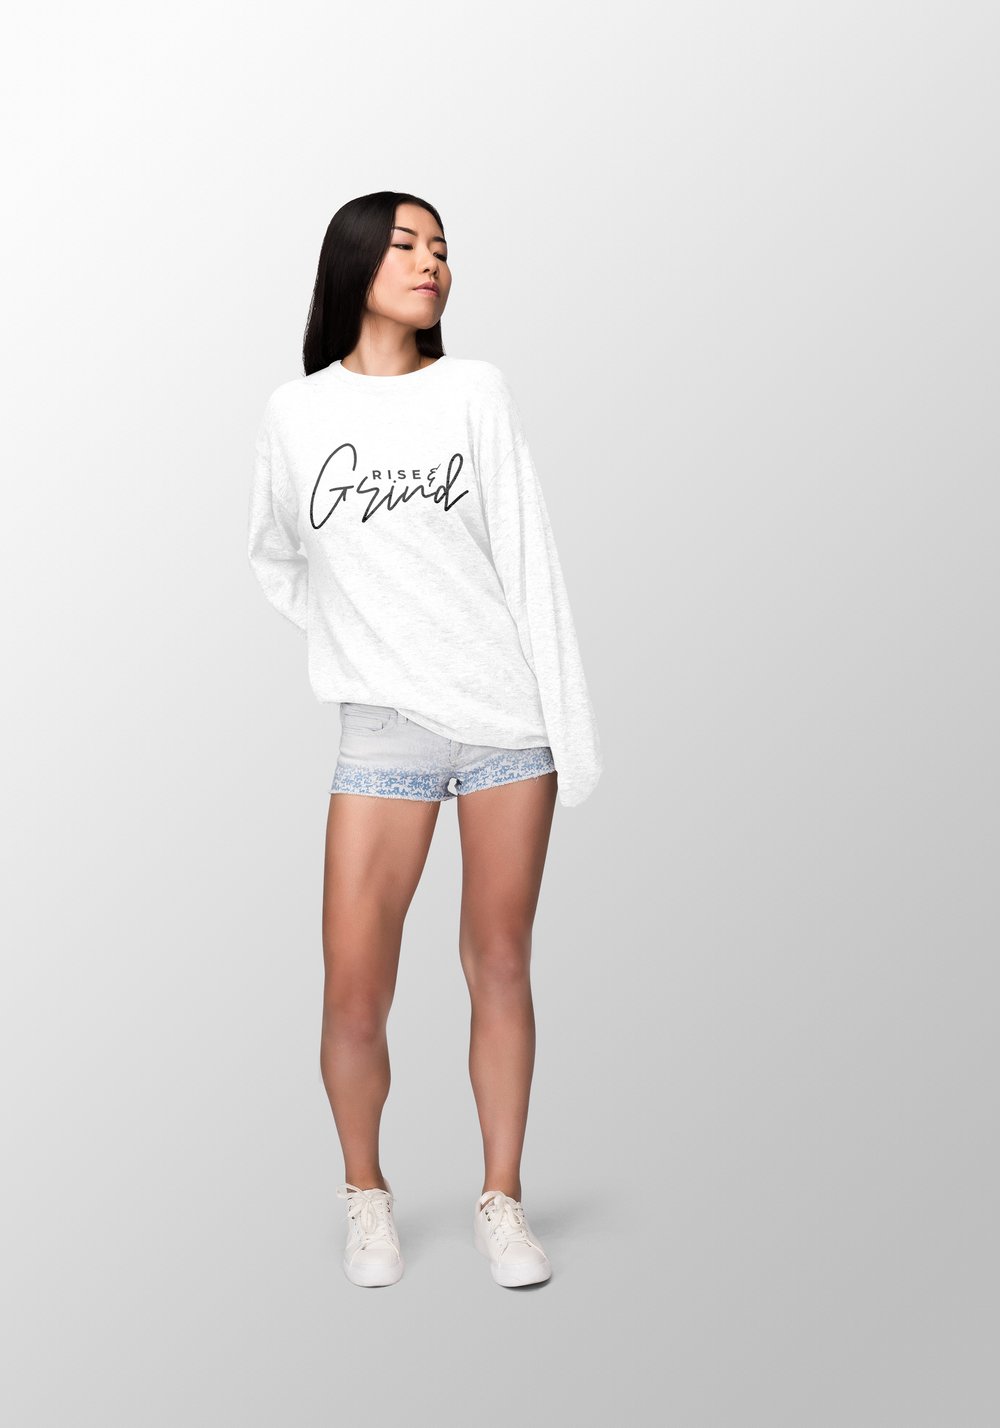 Image of "Rise N Grind" Women's White Long Sleeve 